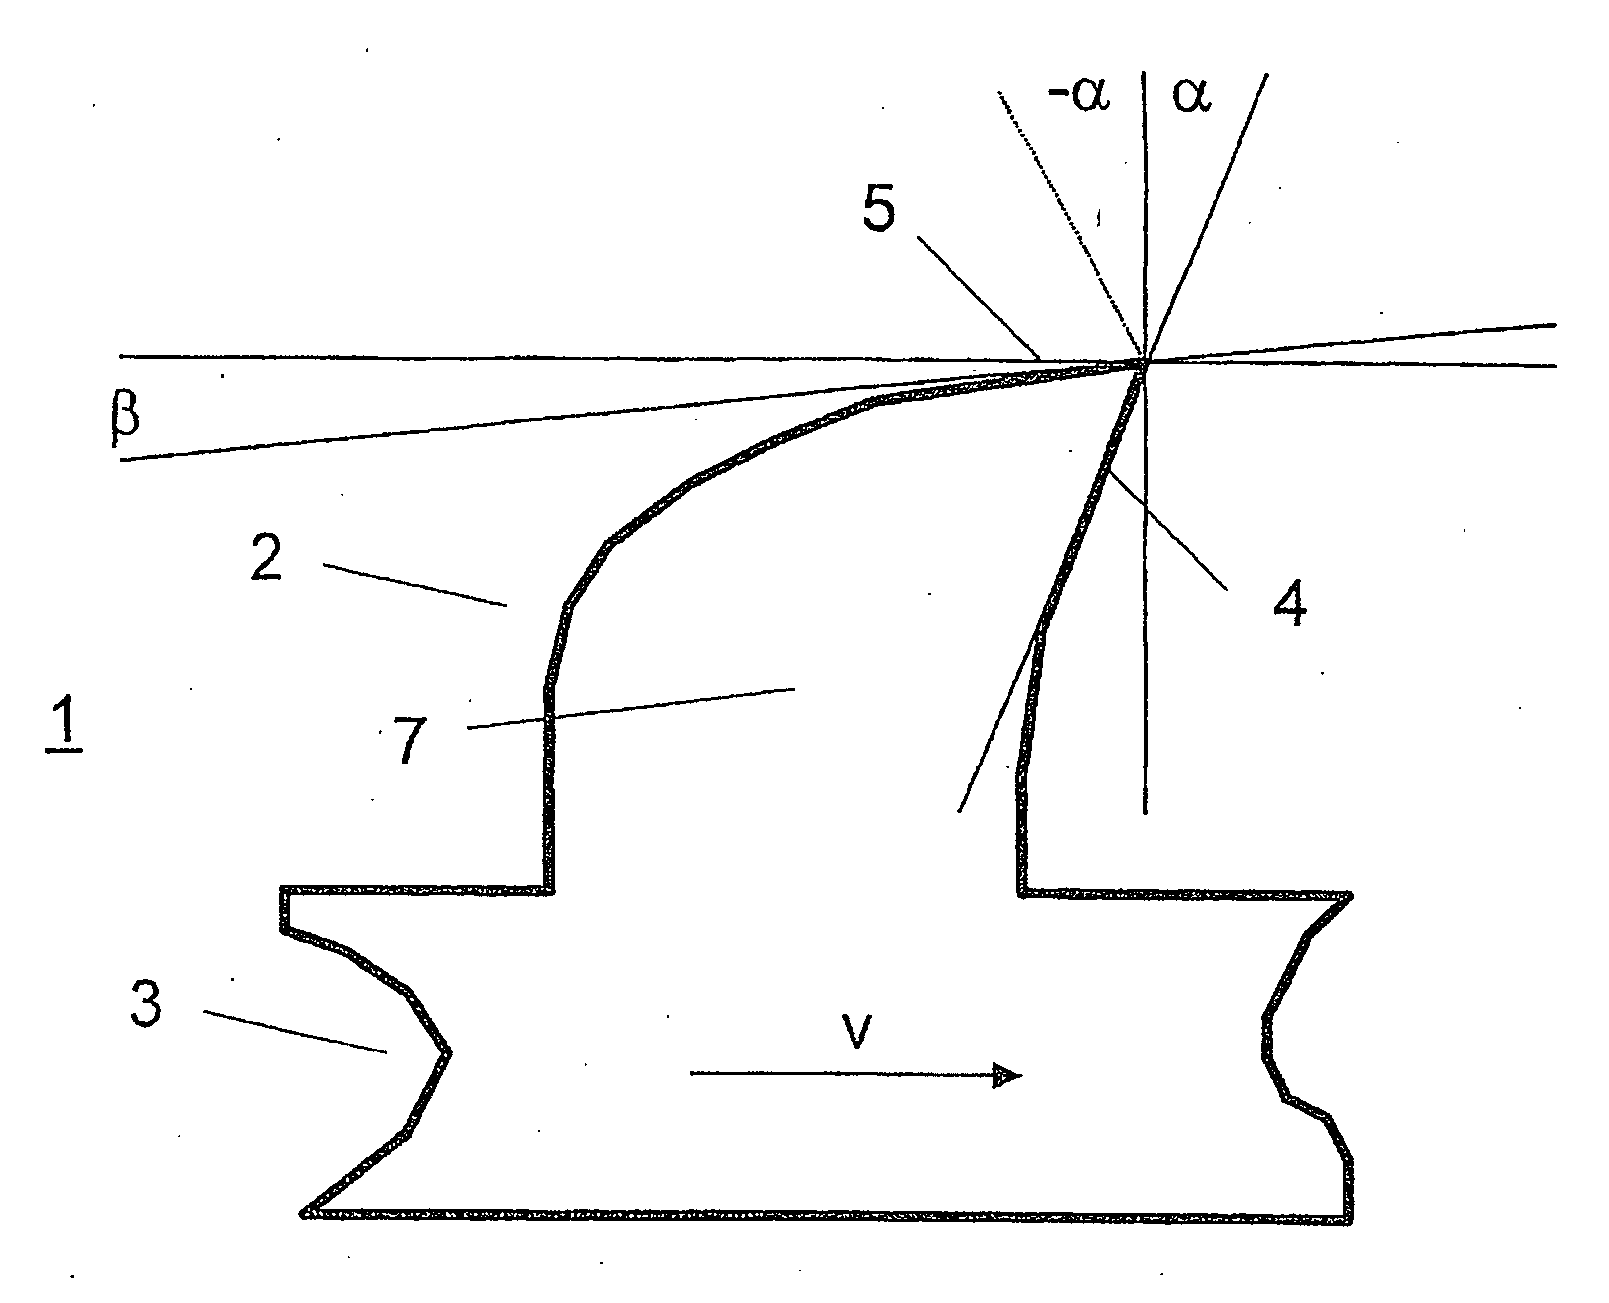 Saw band and method for the production of a saw band